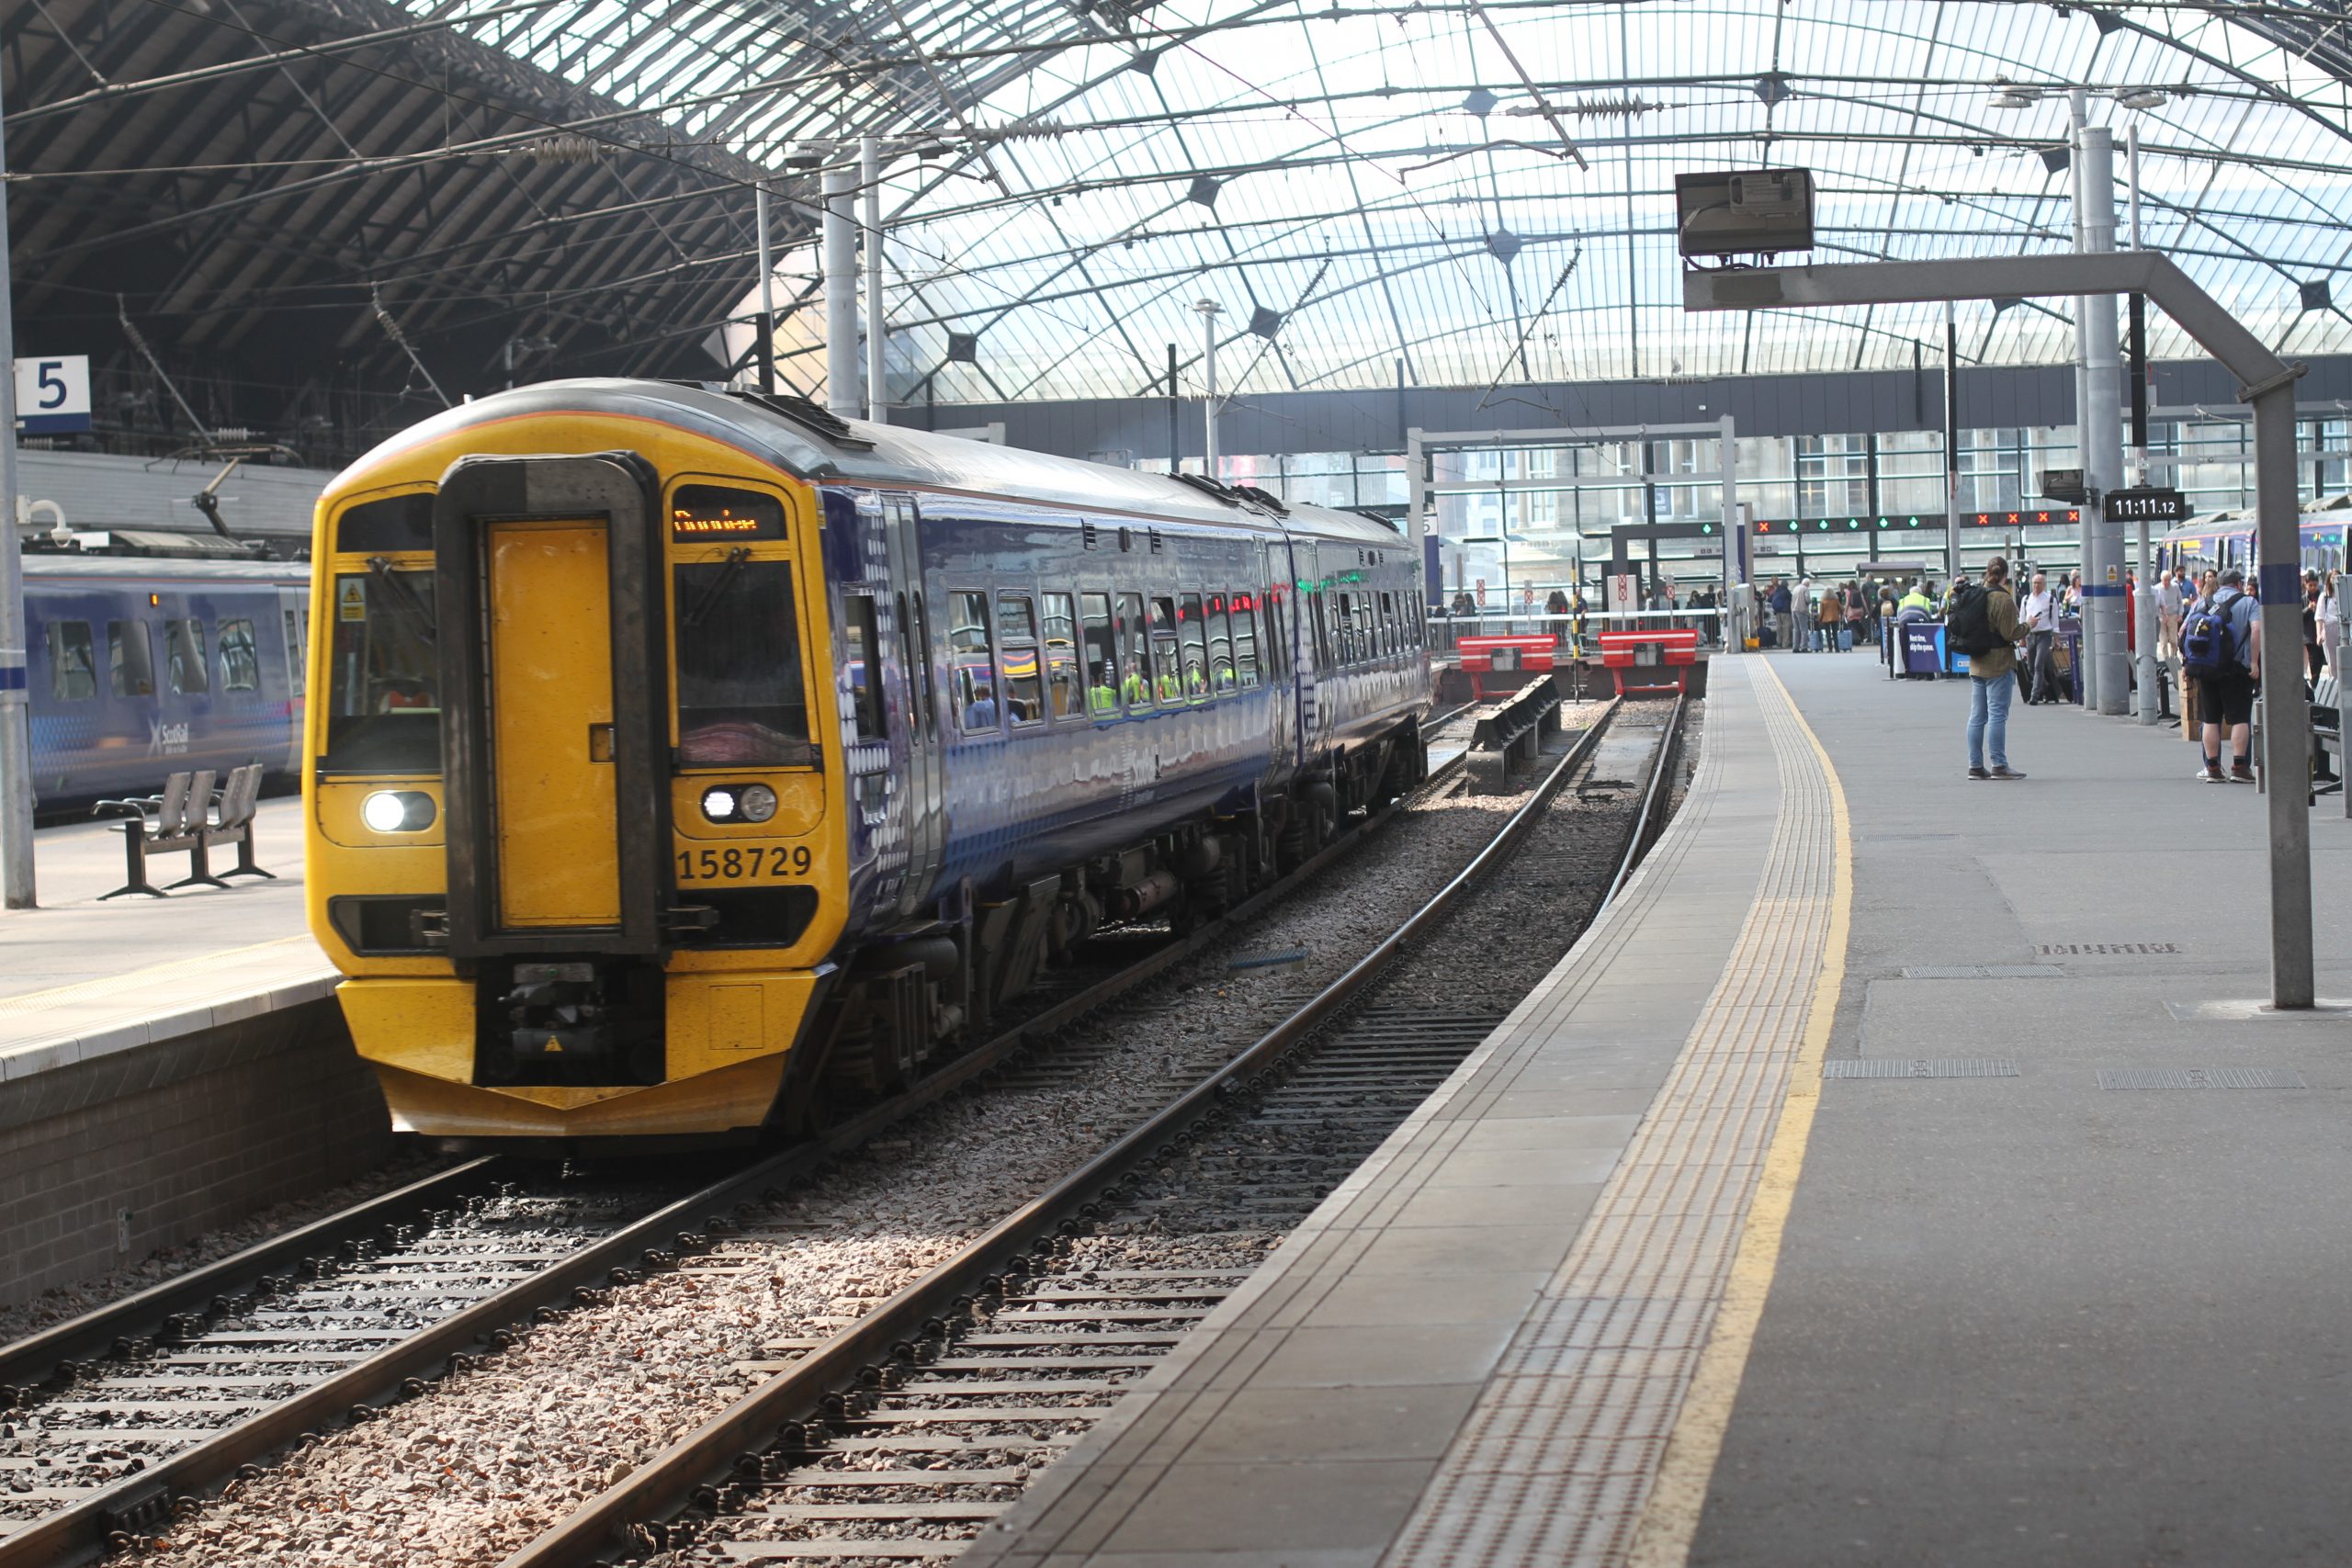 158729 at Glasgow Queen St departing with the 11:11 service to Dundee : Image credit - Alan Turton